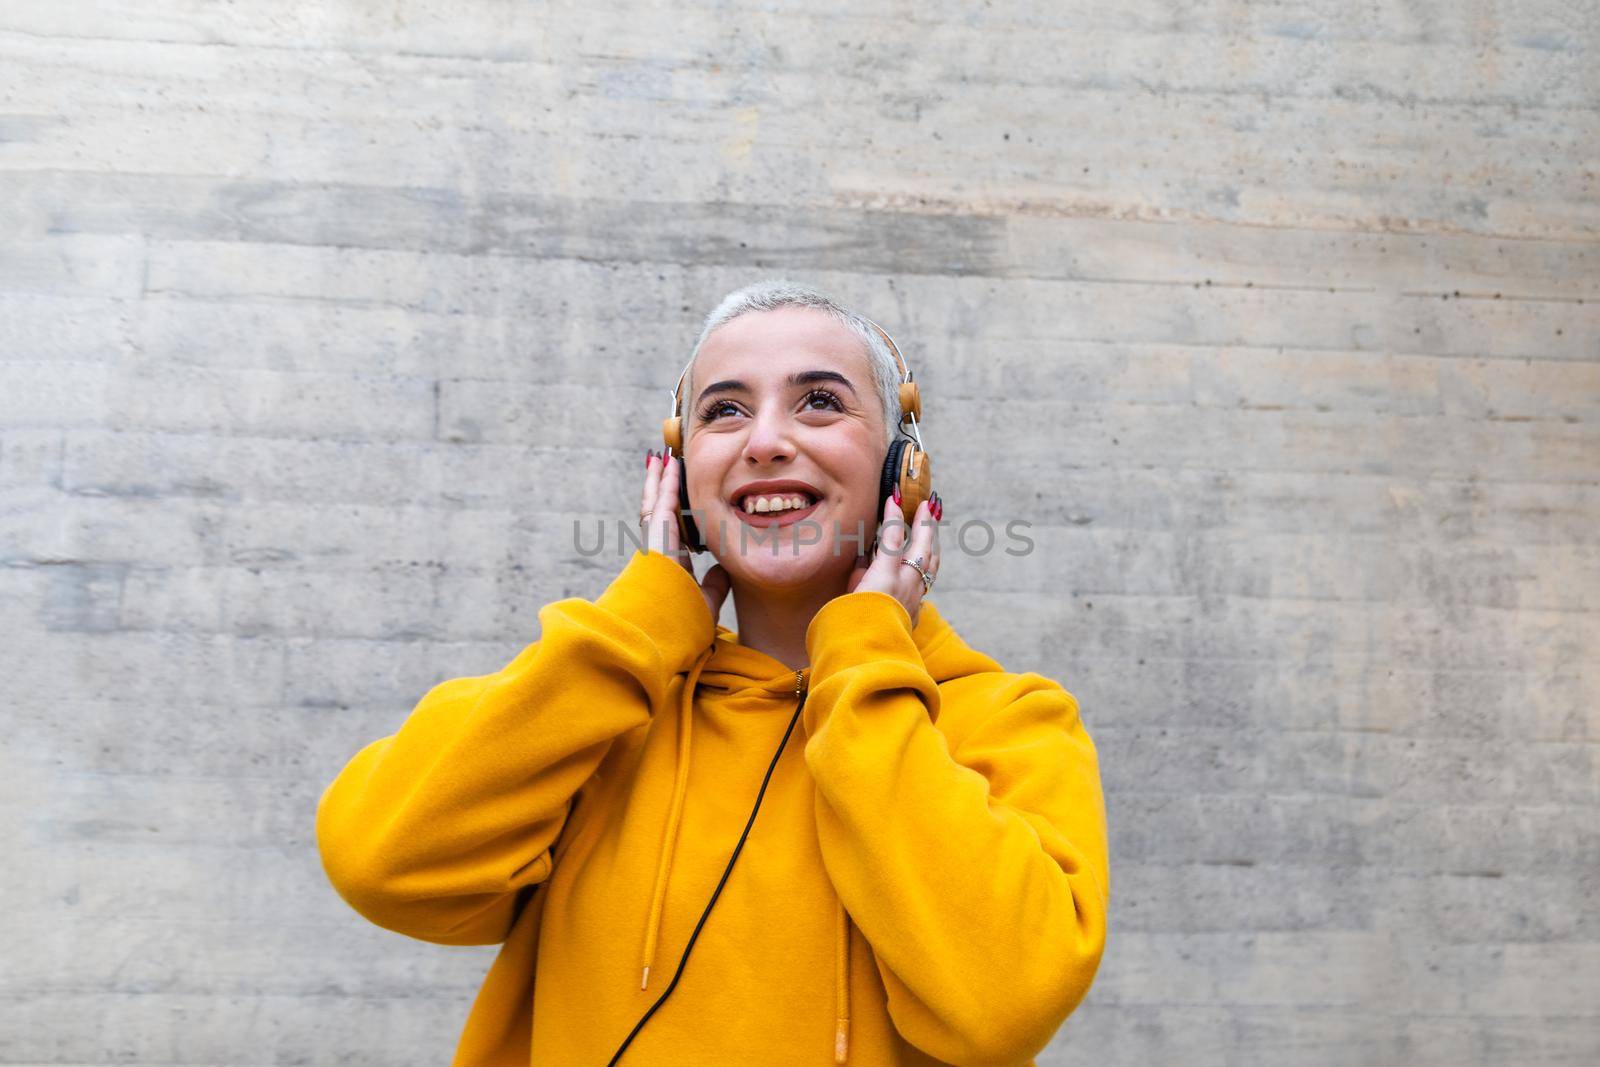 Gen z female teenager with platinum blonde buzz cut listening to music with wireless headphones.Lifestyle concept.